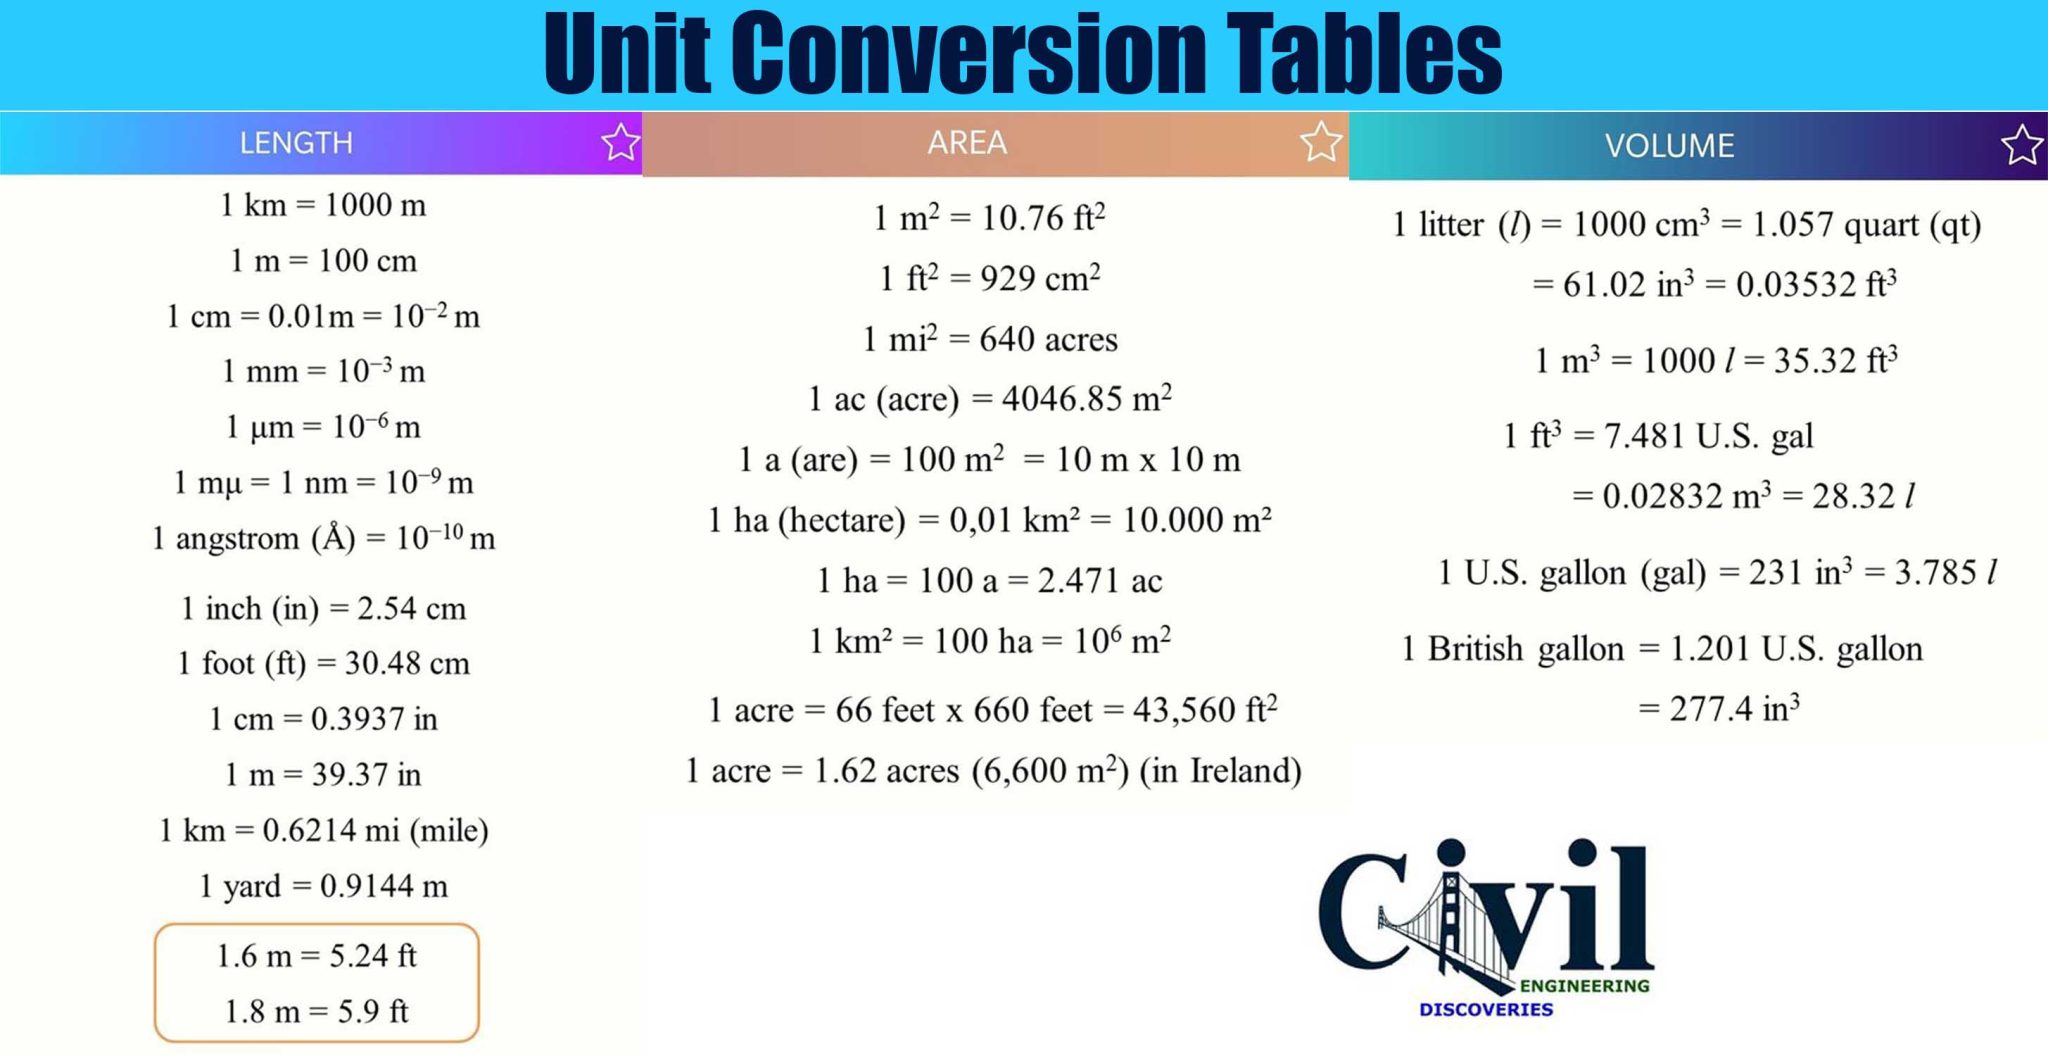 Unit Conversion Tables - Engineering Discoveries